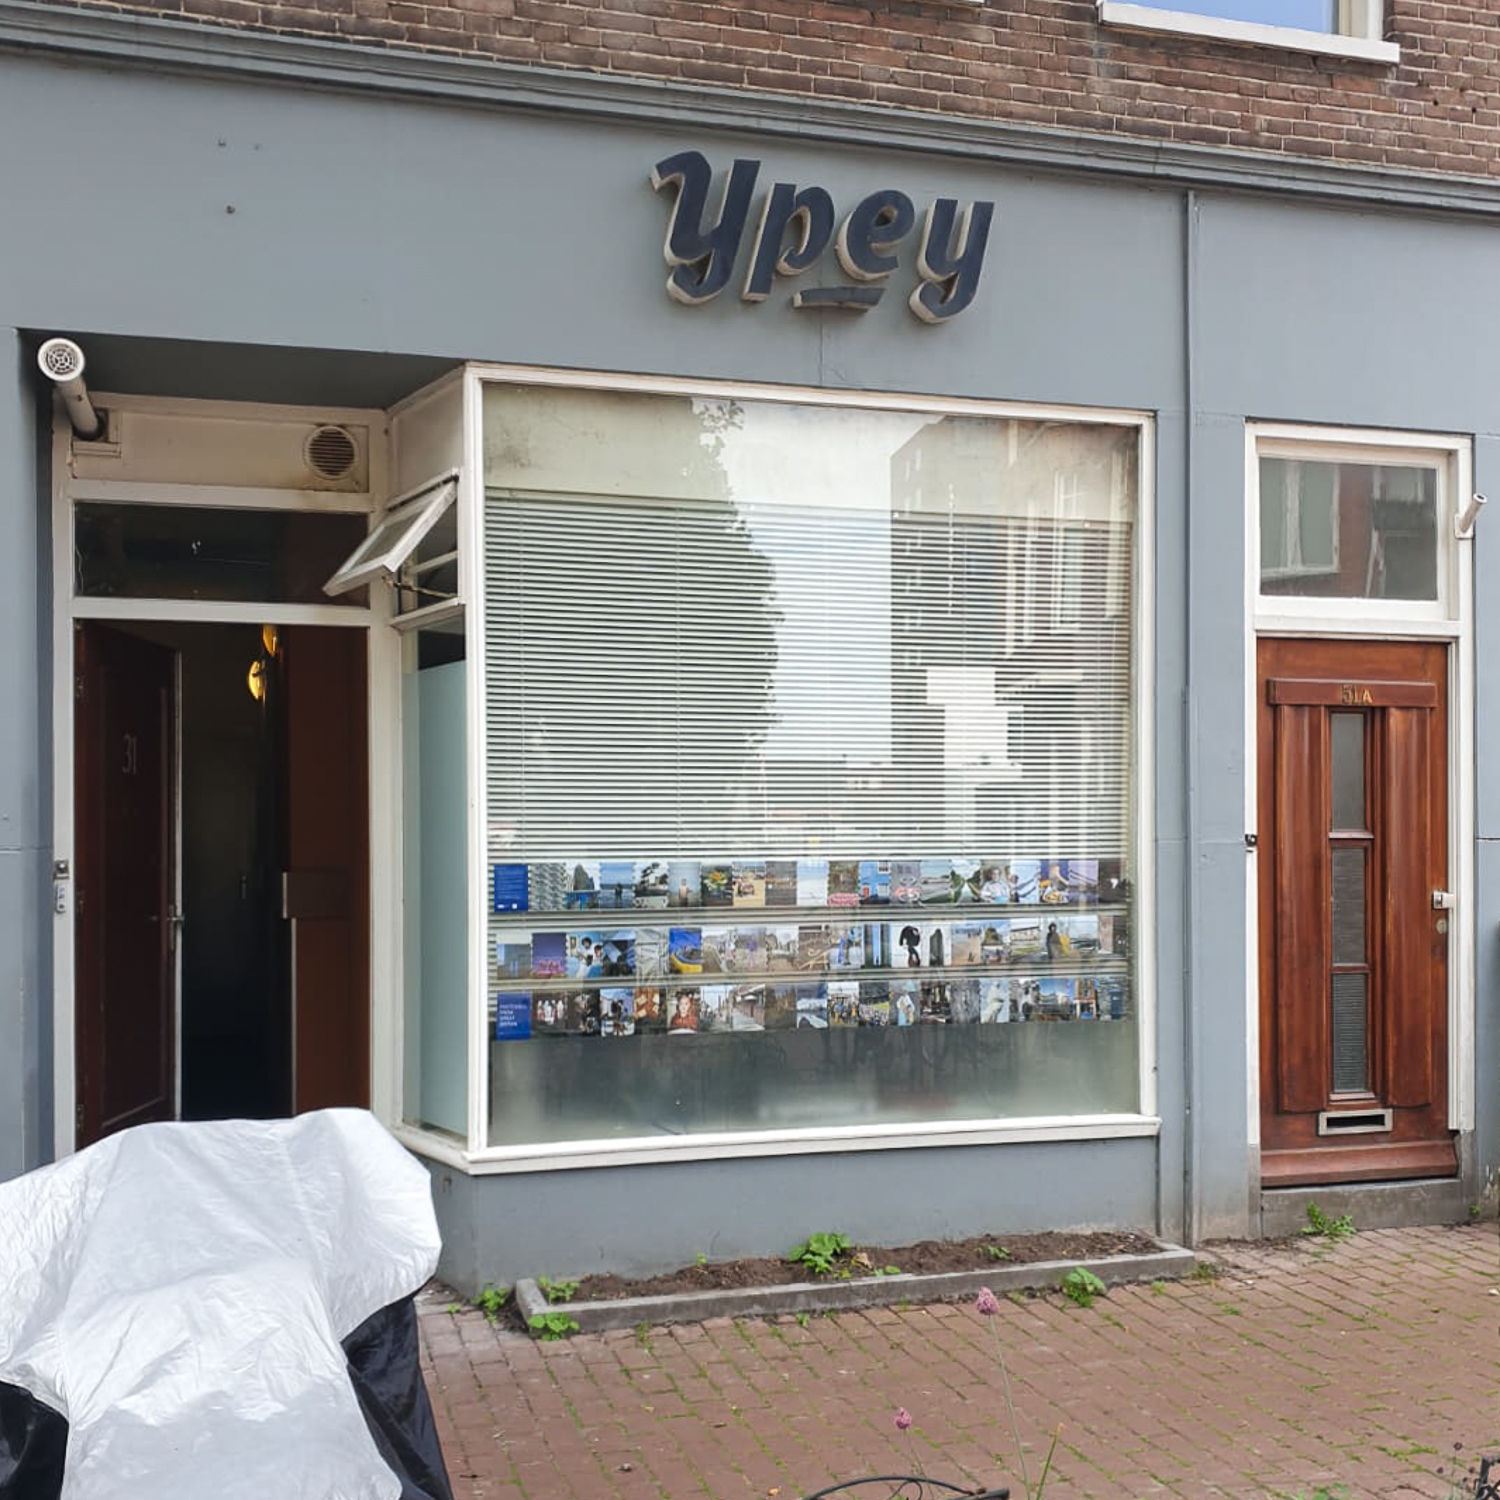 Exhibition of postcards displayed in a large window on a street in Groningen, The Netherlands, with 'a sign reading 'Ypey' above.